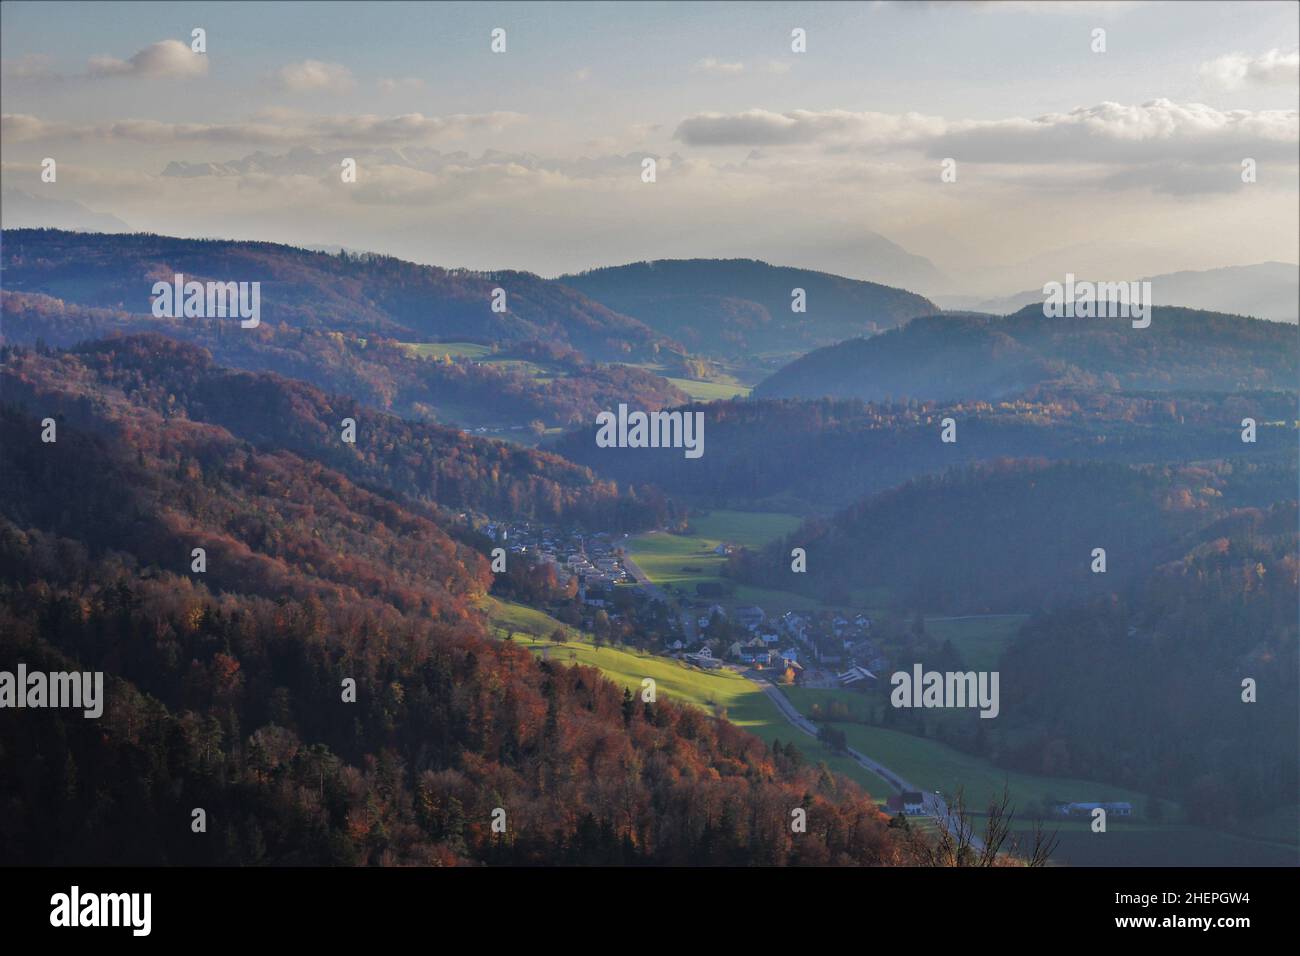 View from the top of Uteliberg Mountain onto Swiss Plateau. ROlling green alpine hills in autumn background (Zurich, Switzerland) Stock Photo